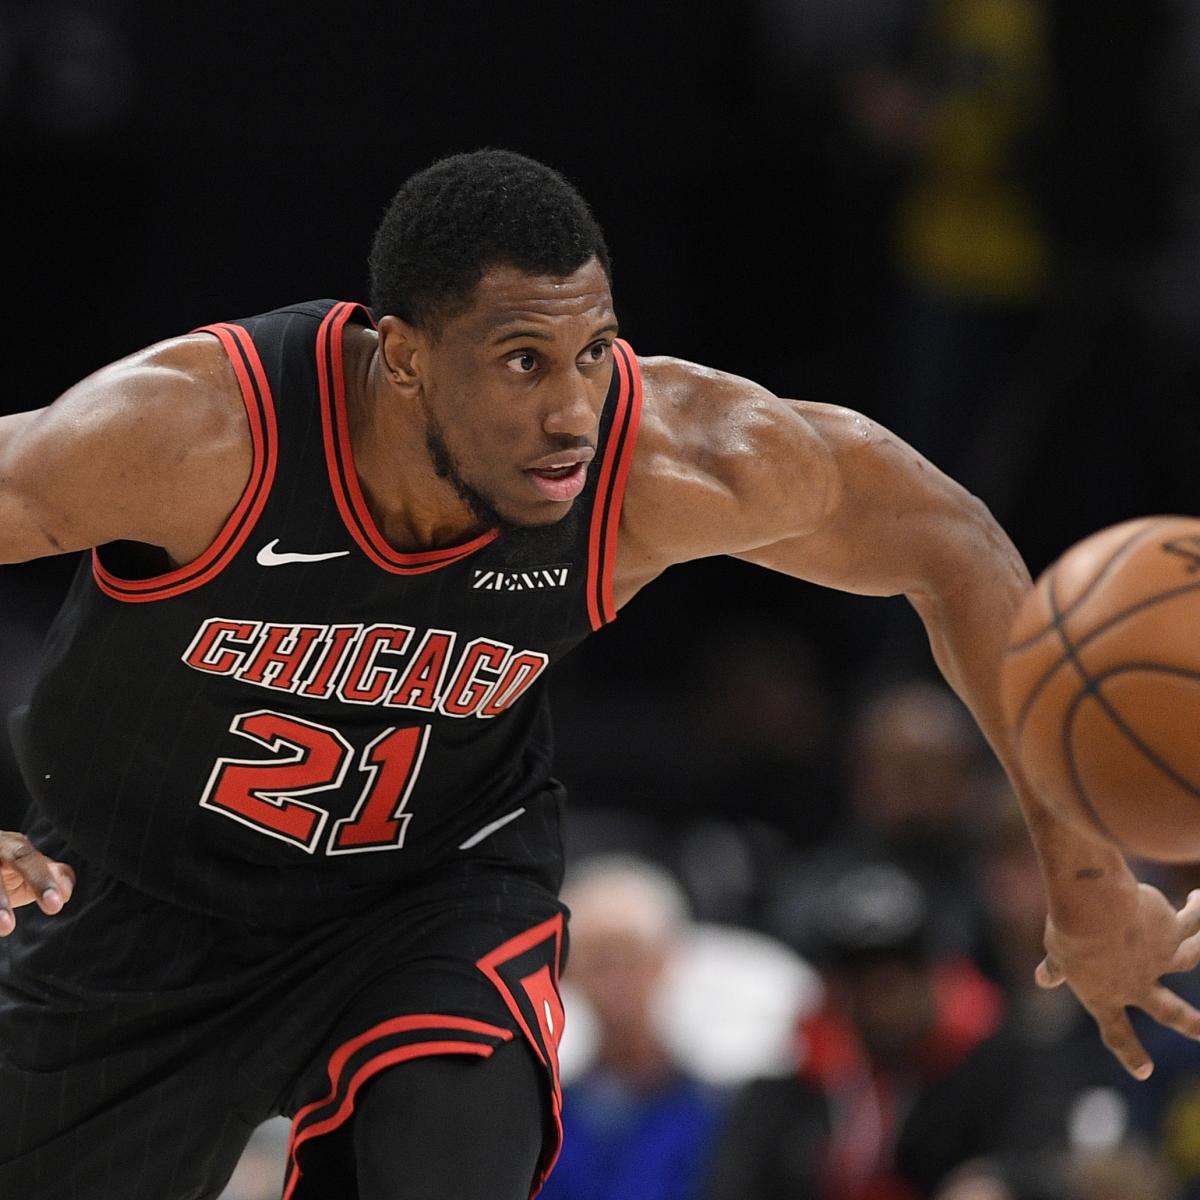 Bulls Rumors: Thaddeus Young 'Most Readily Available' Trade Candidate in Chicago thumbnail